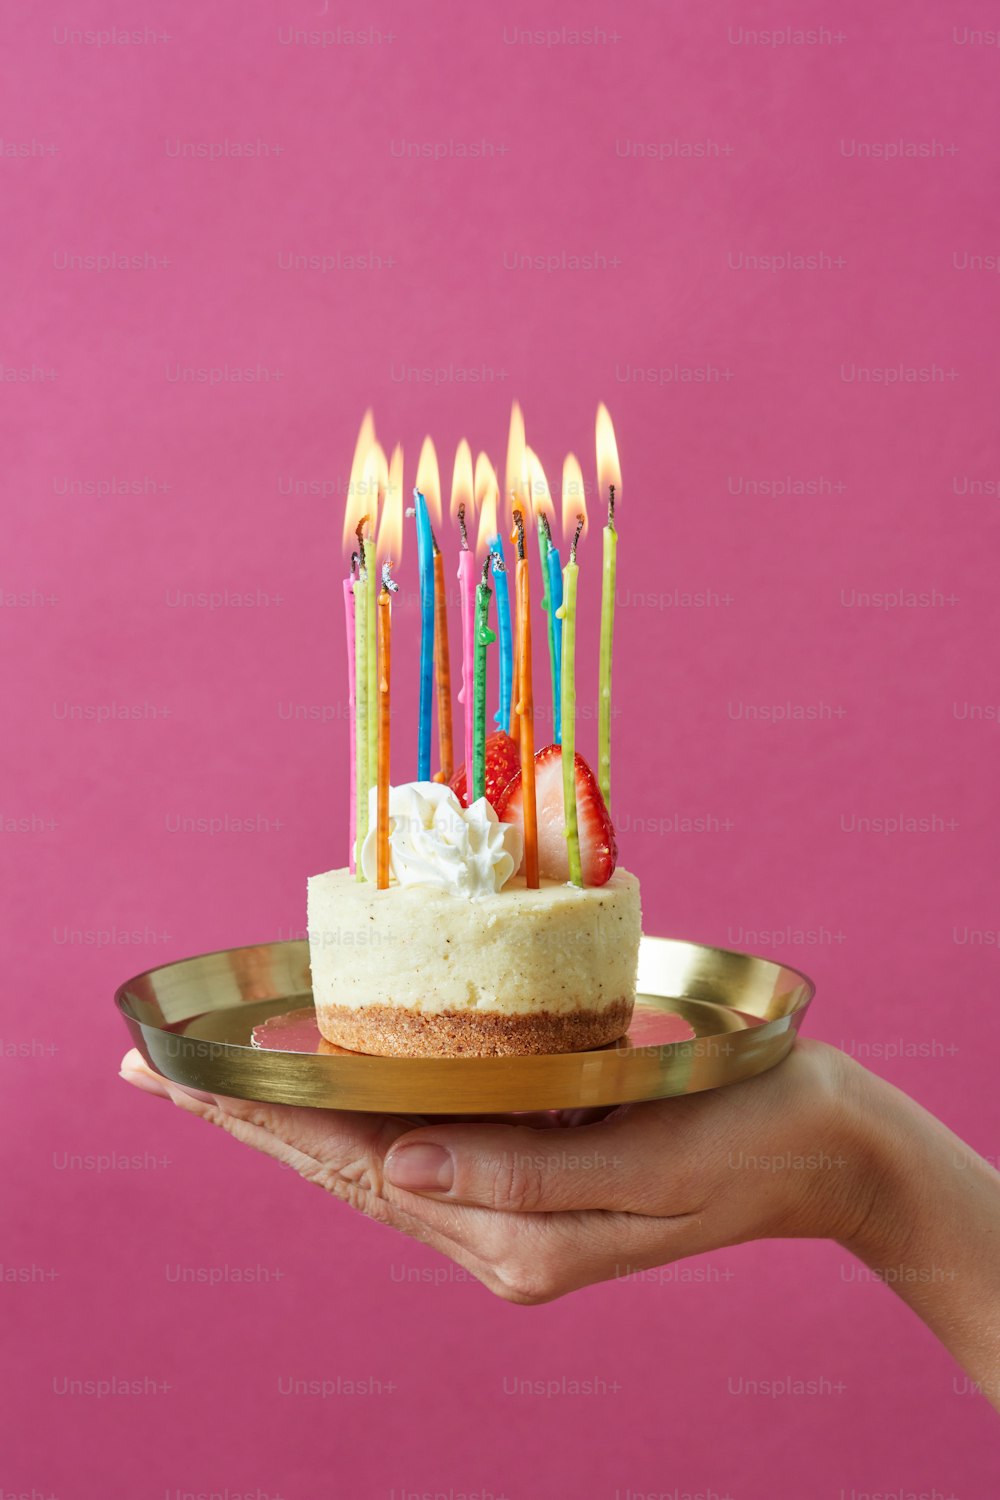 a hand holding a plate with a cake with candles on it